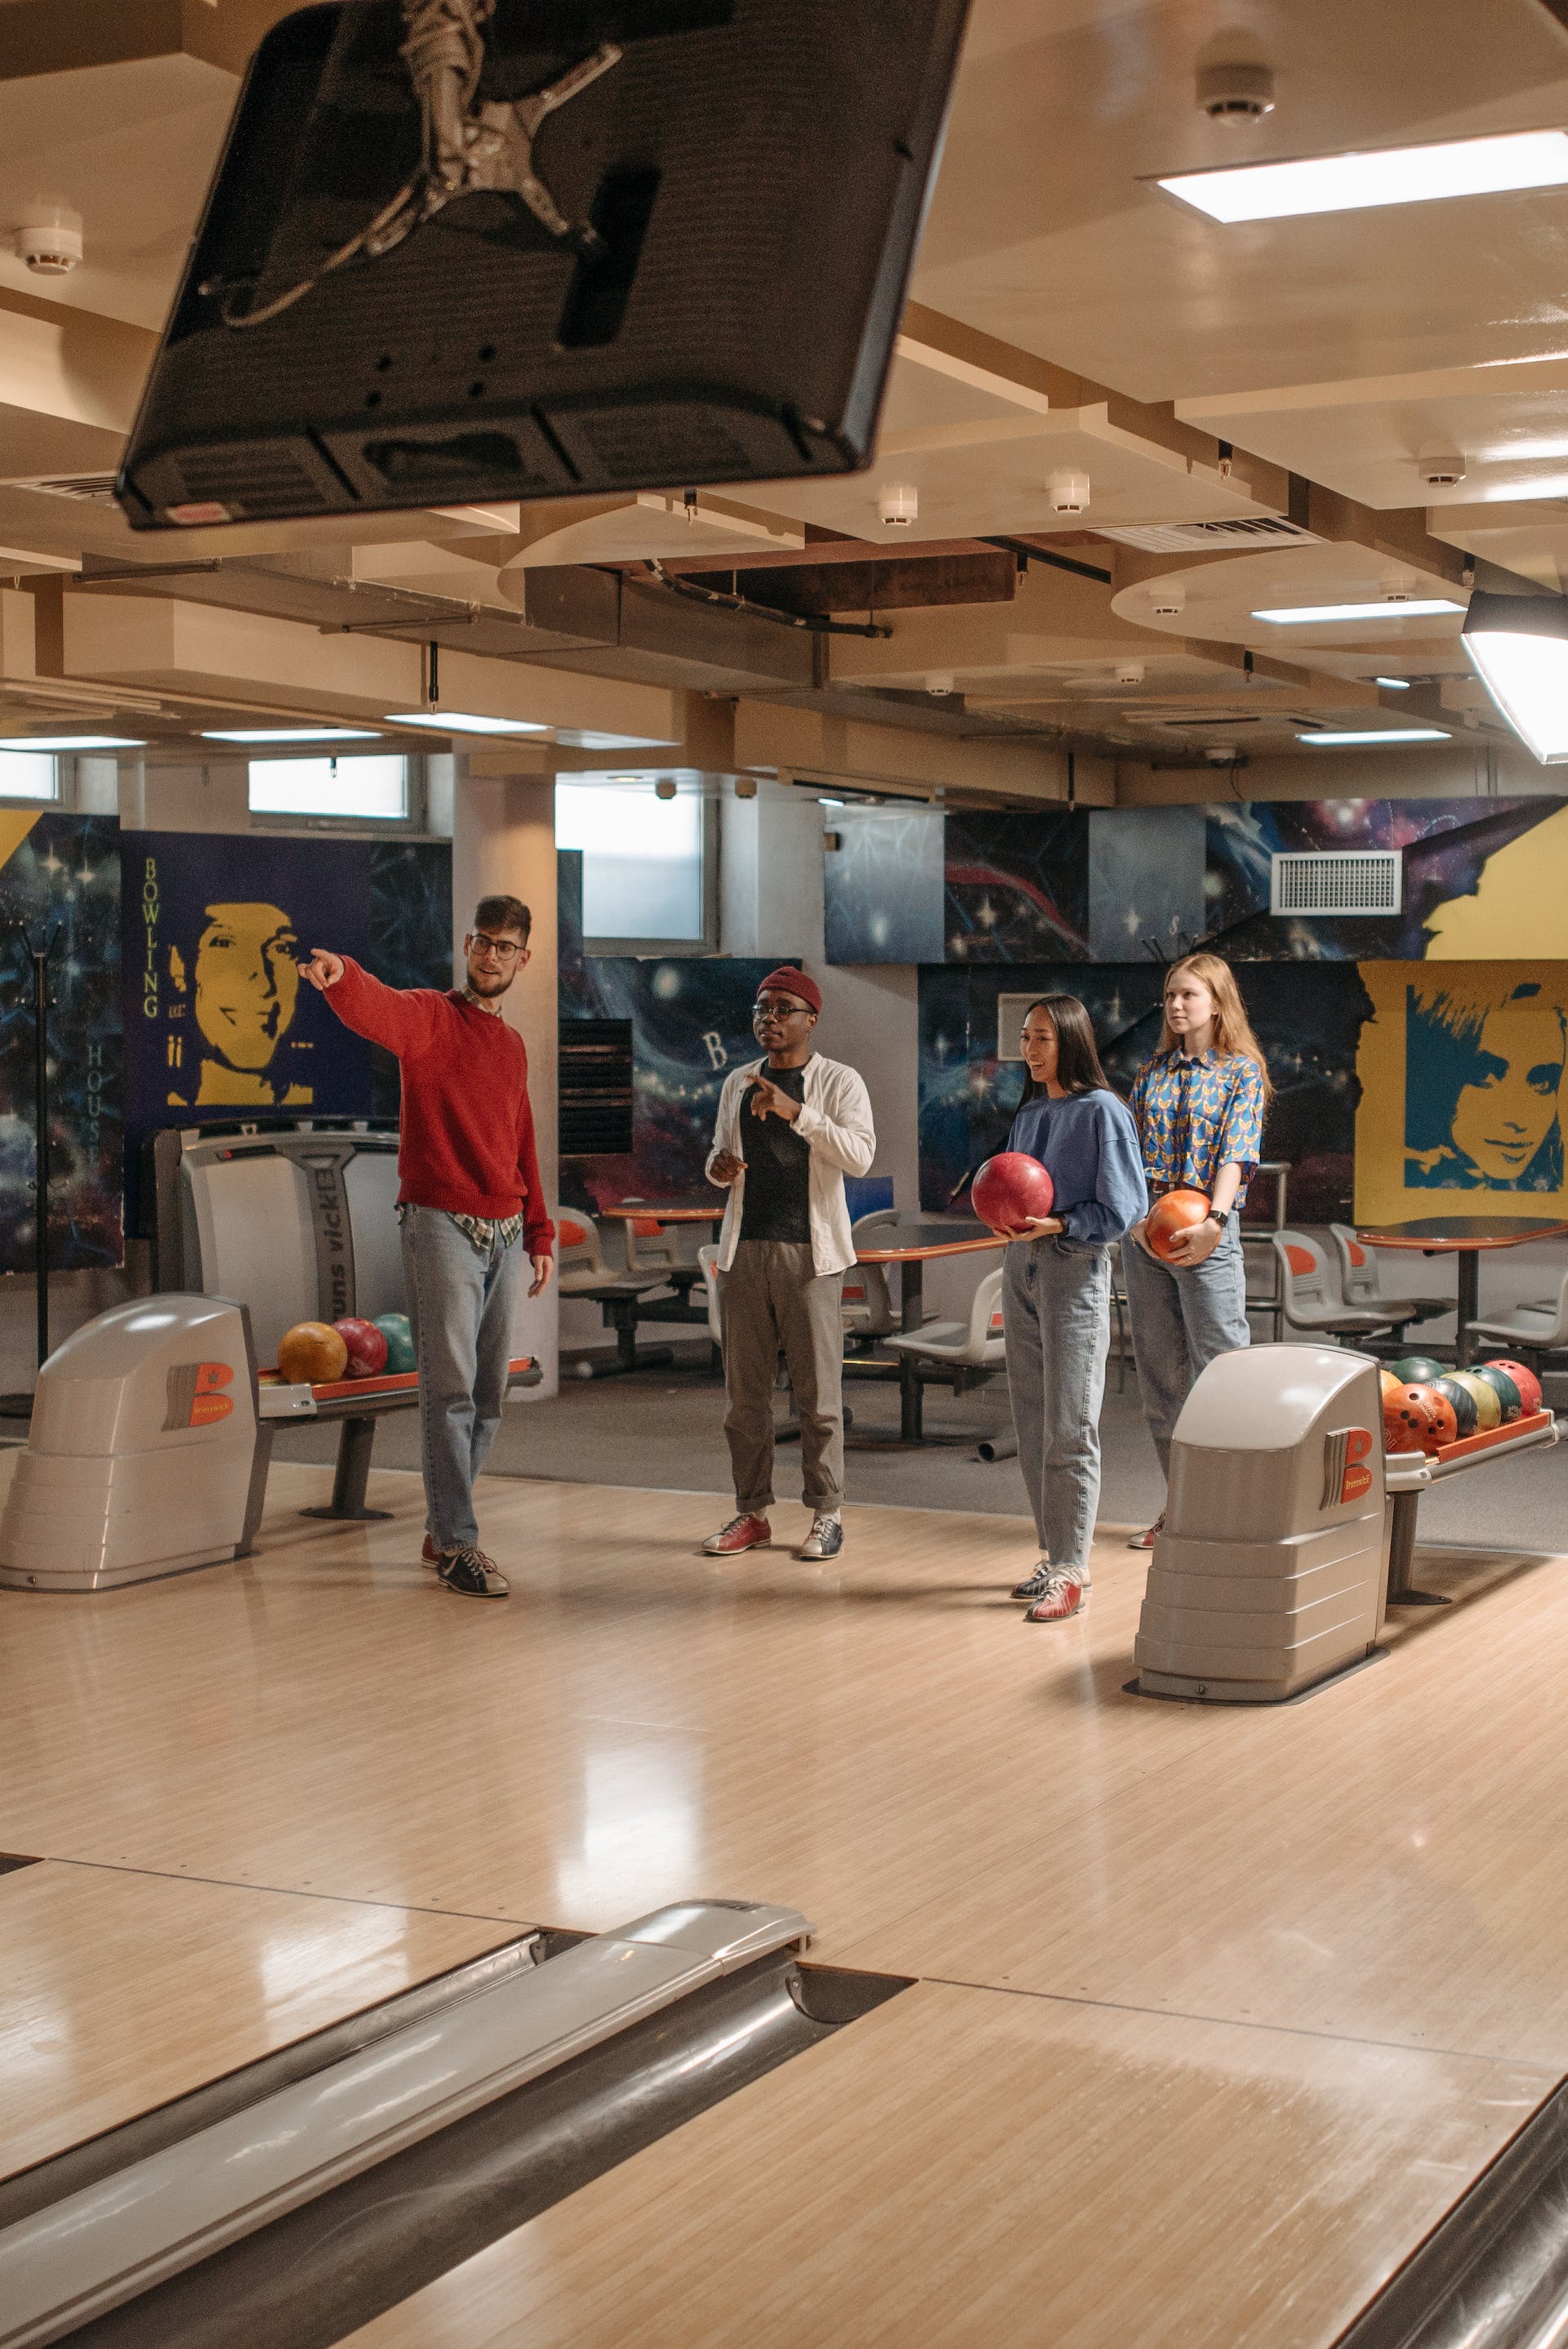 A group of friends at a bowling alley | Source: Pexels